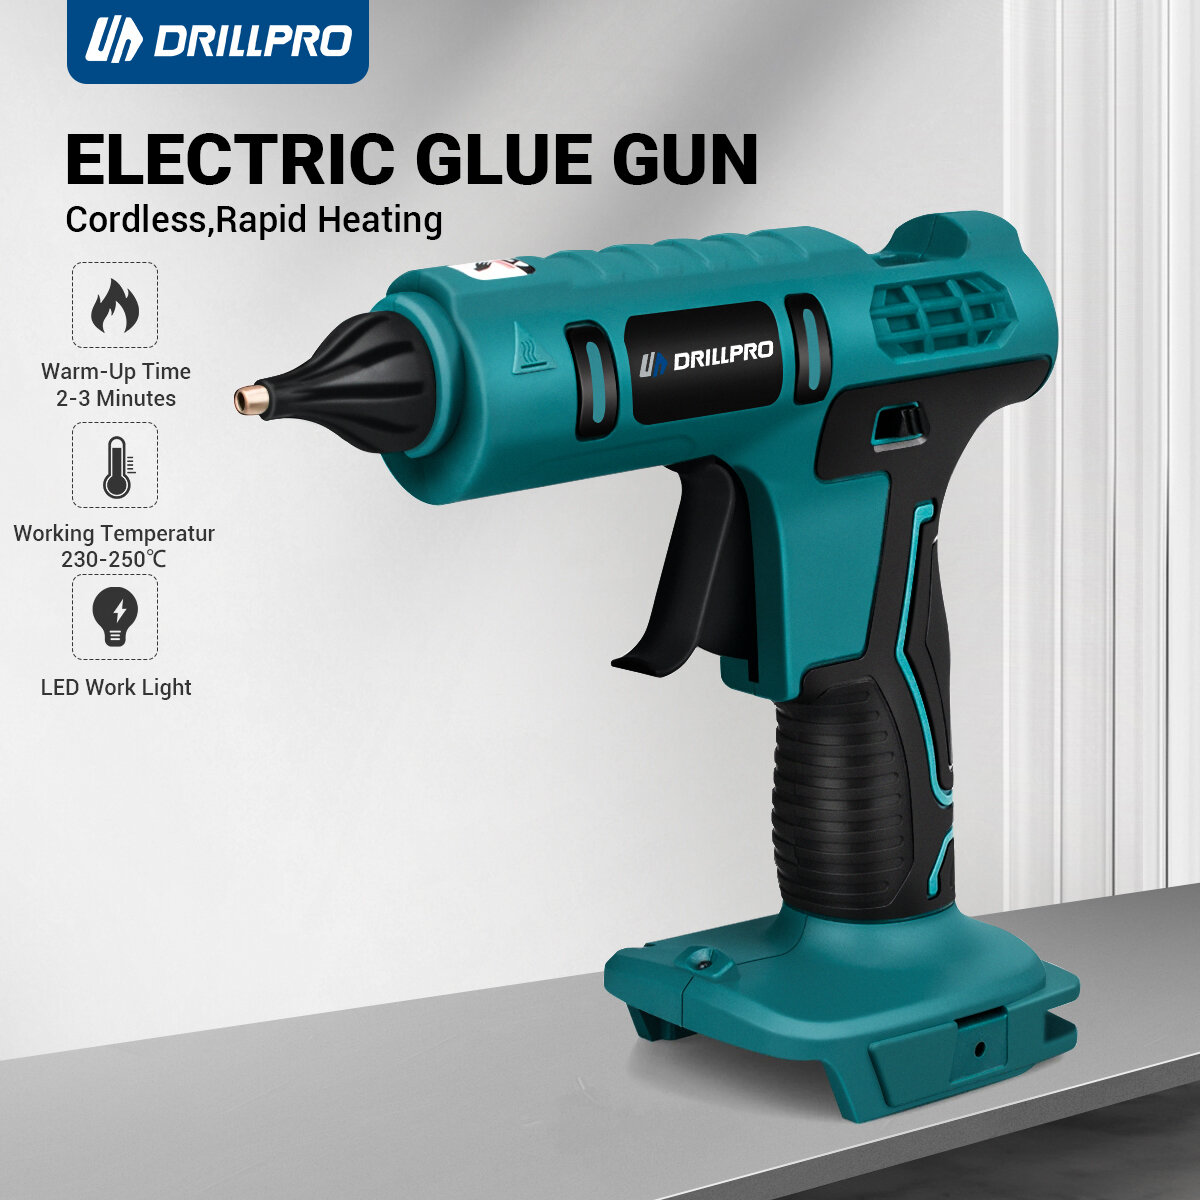 Drillpro Electric Hot Melt Glue Gun with Rapid Heating Intelligent Temperature Control for DIY Crafting Works with 10PCS Glue Sticks Fit For Mak 18V Battery Convenient and Efficient Use